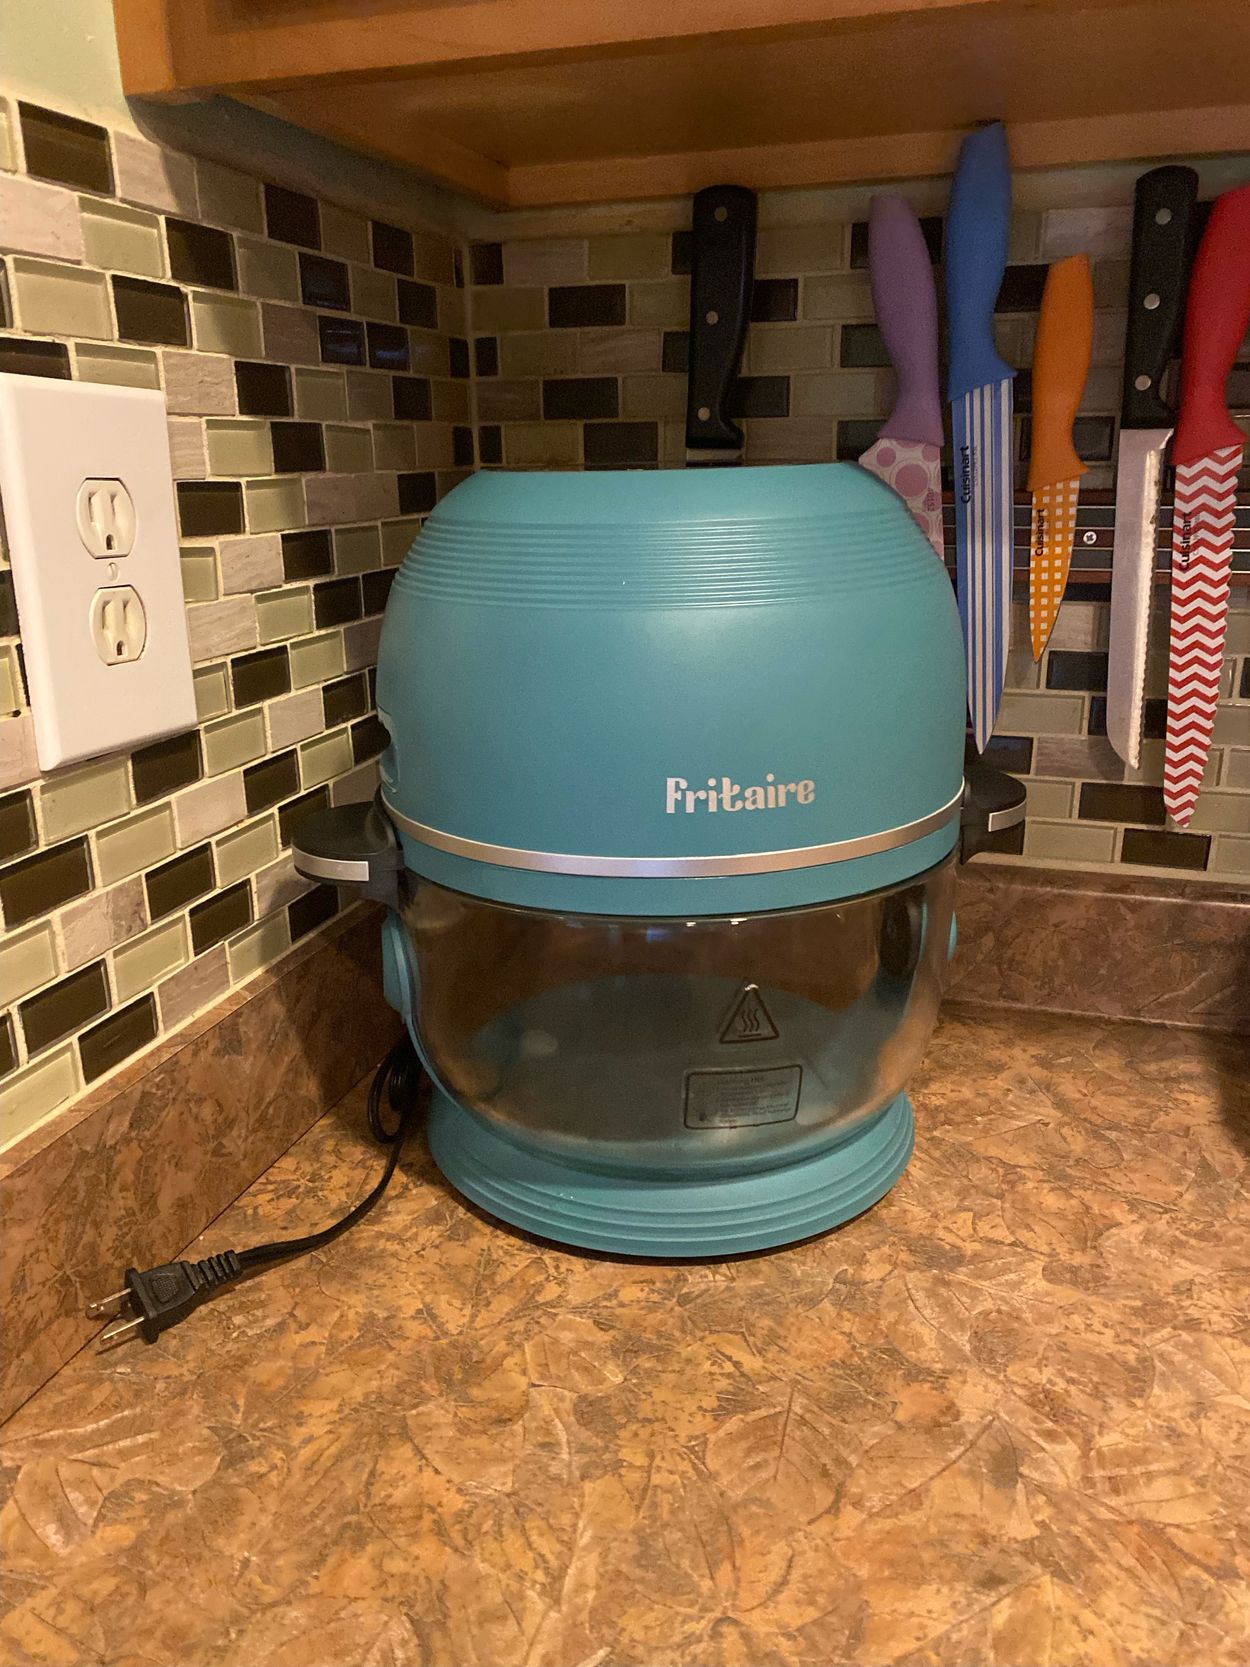 Fritaire Self-Cleaning Glass Bowl Air Fryer, 5-Qt, Green